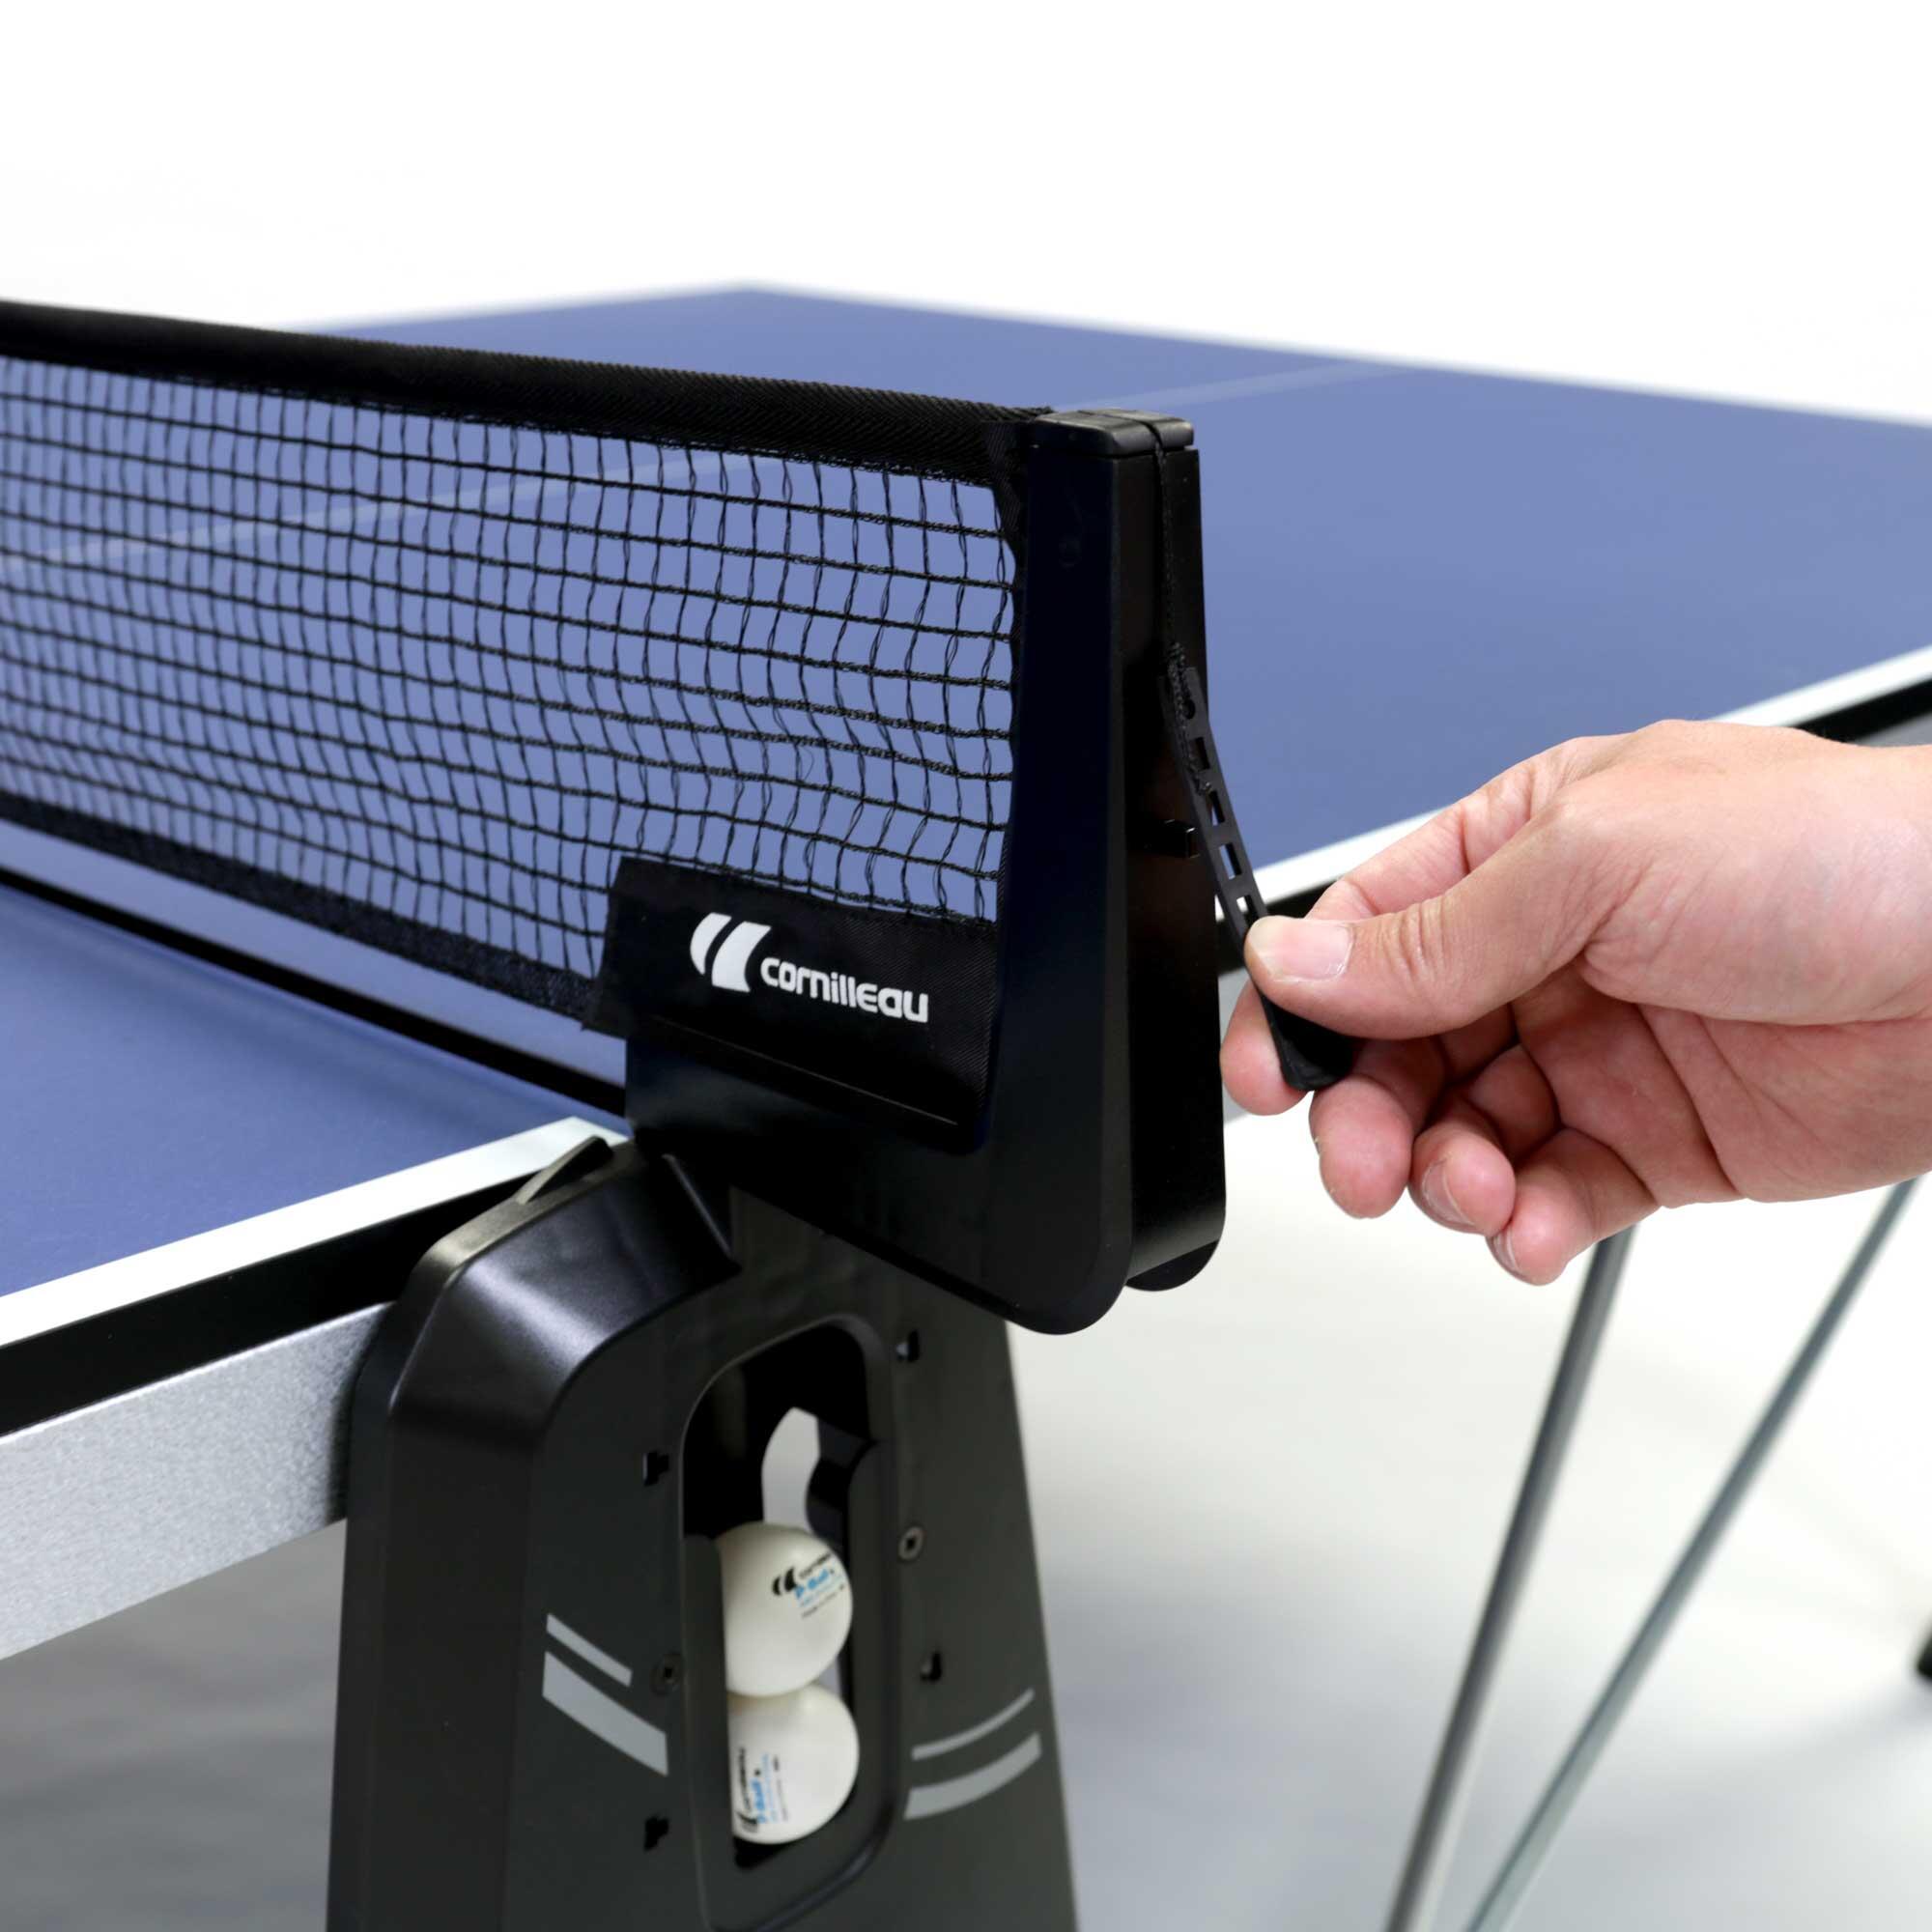 Table Tennis Table 300 Indoor - Blue 7/9